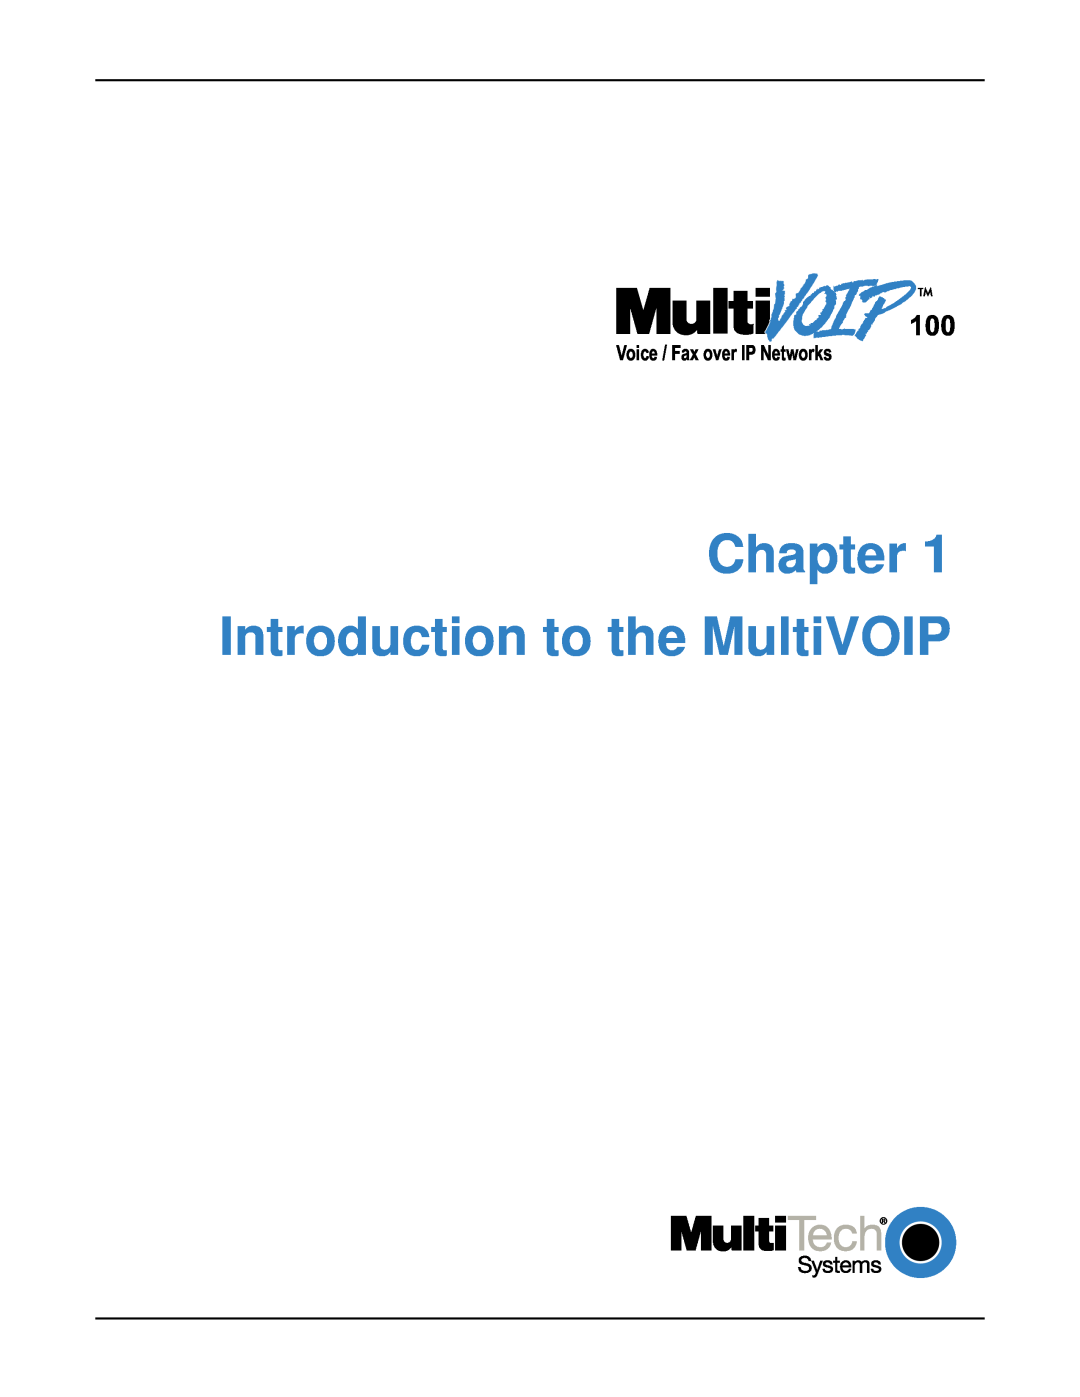 Multi-Tech Systems MVP120 manual Chapter Introduction to the MultiVOIP, Voice / Fax over IP Networks 